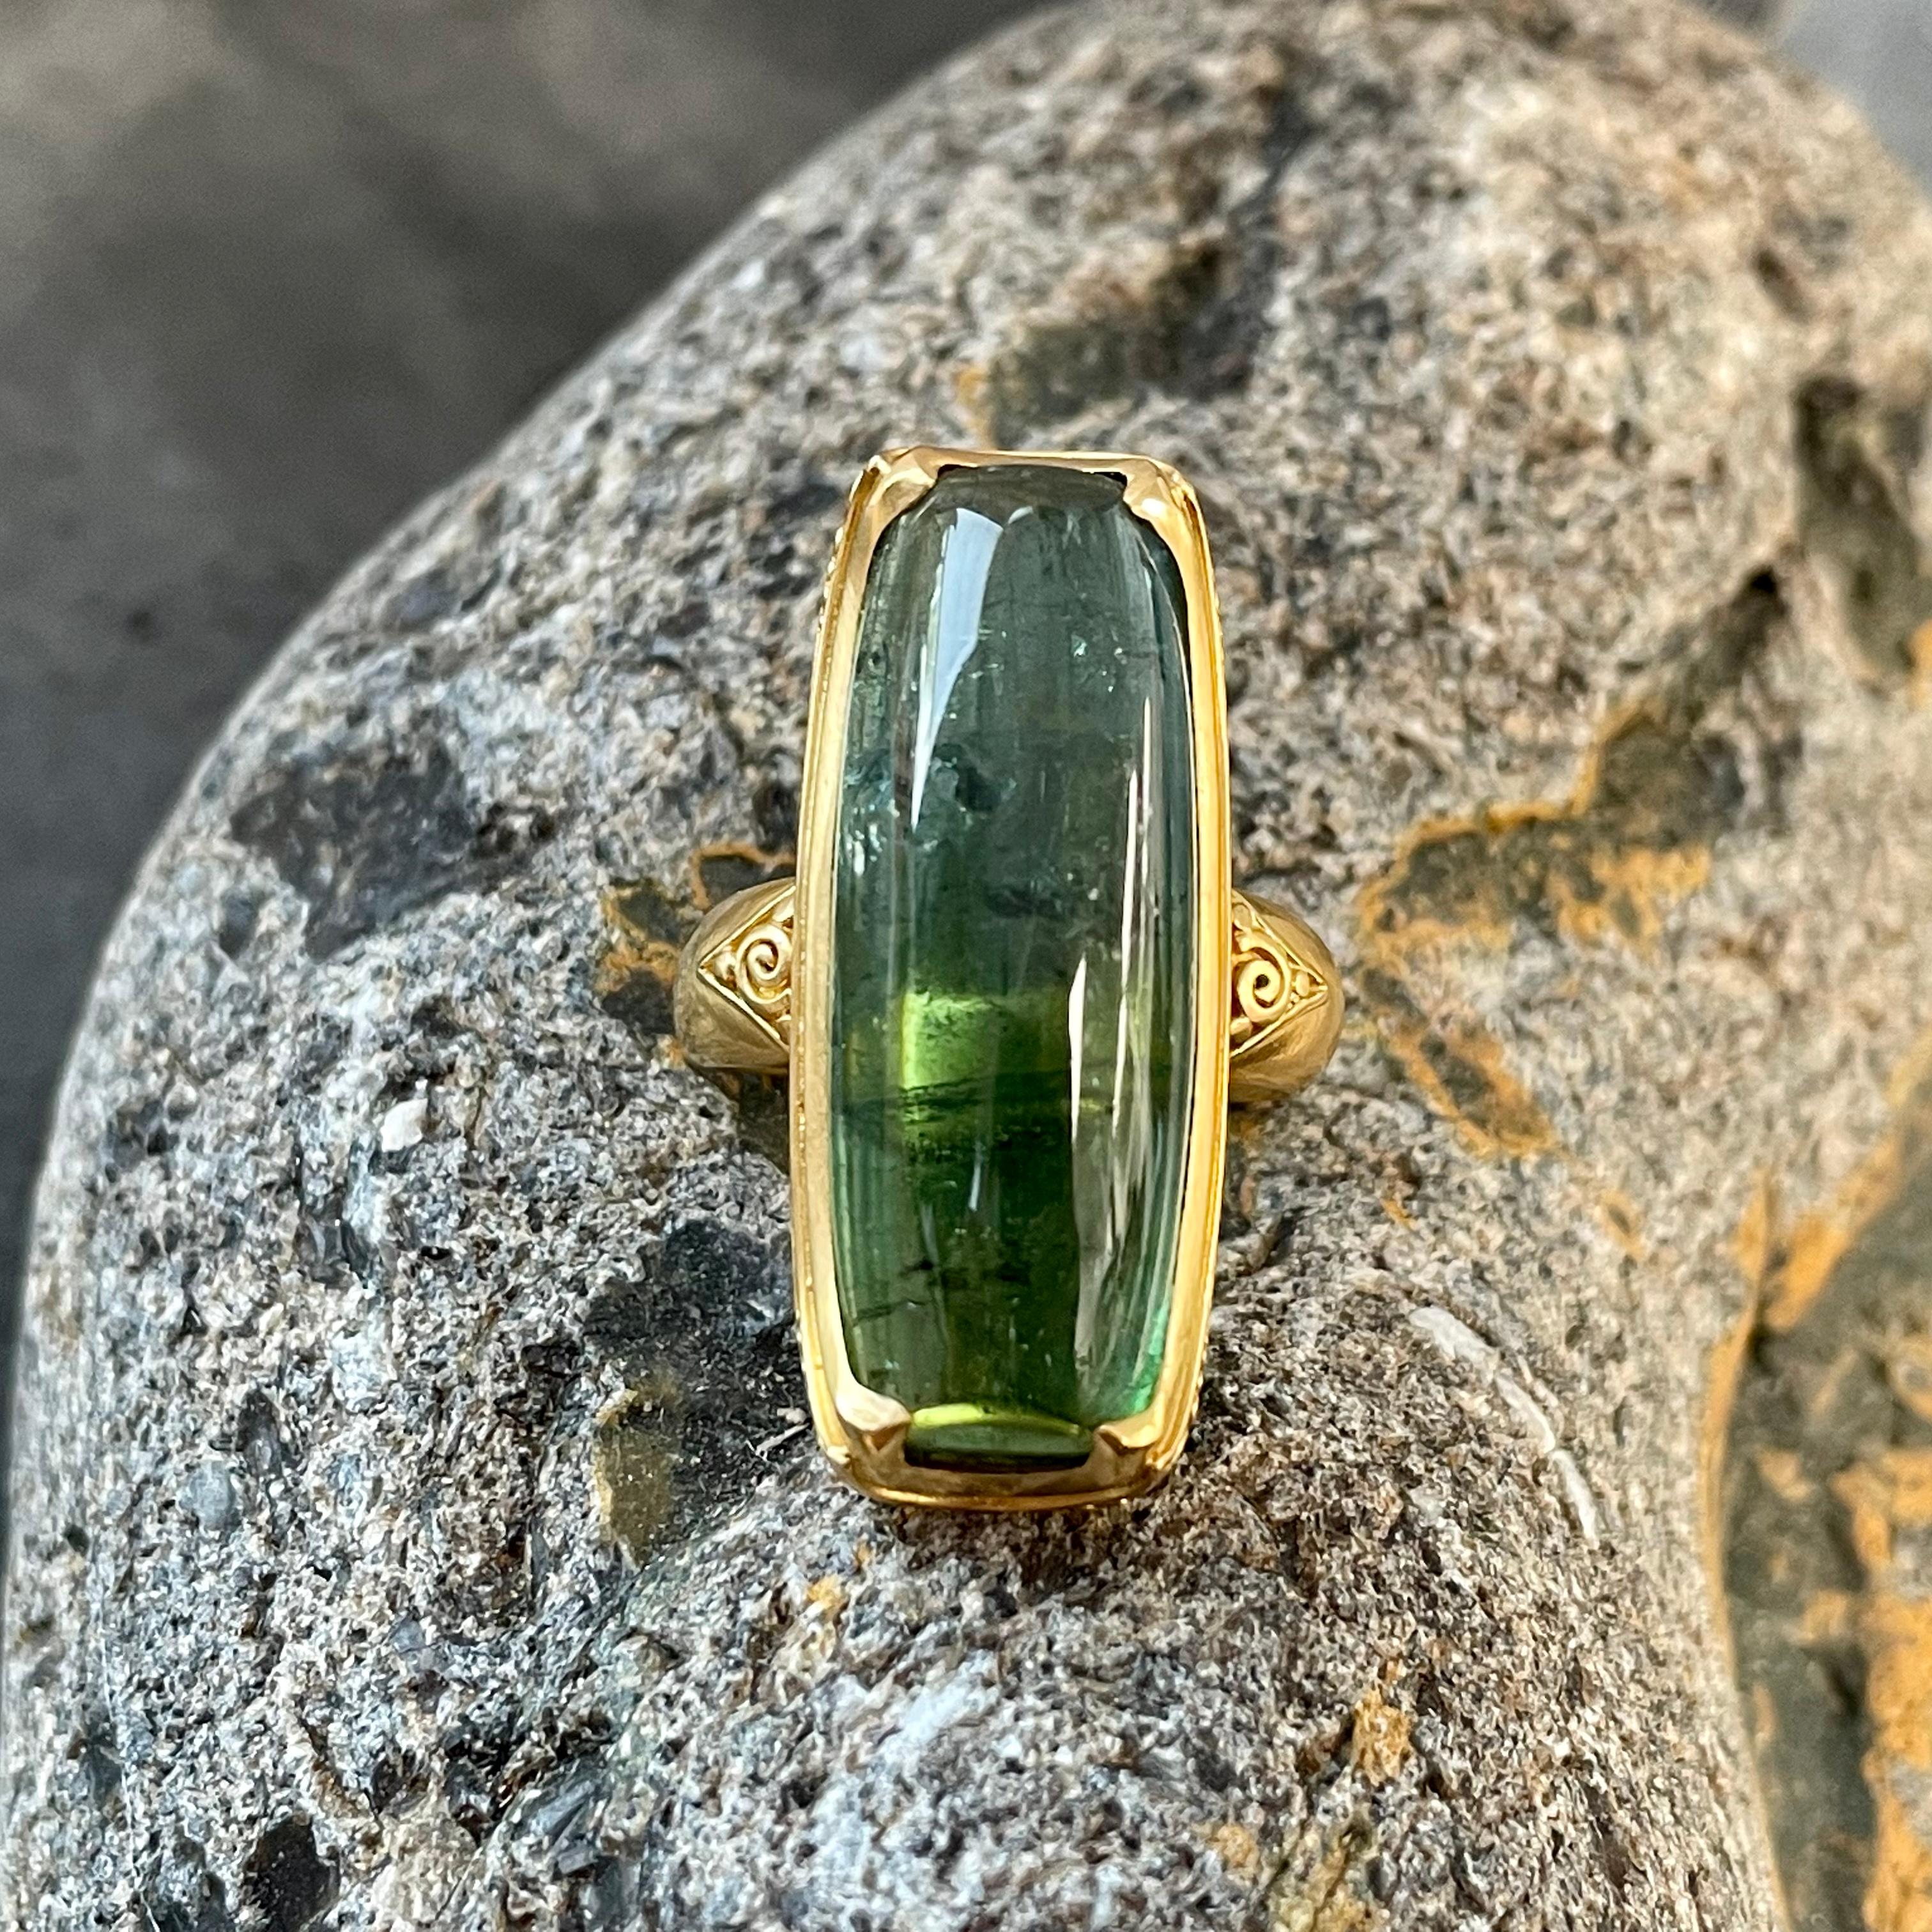 A beautiful long cushion shaped green tourmaline cabochon from Brazil is set in a 